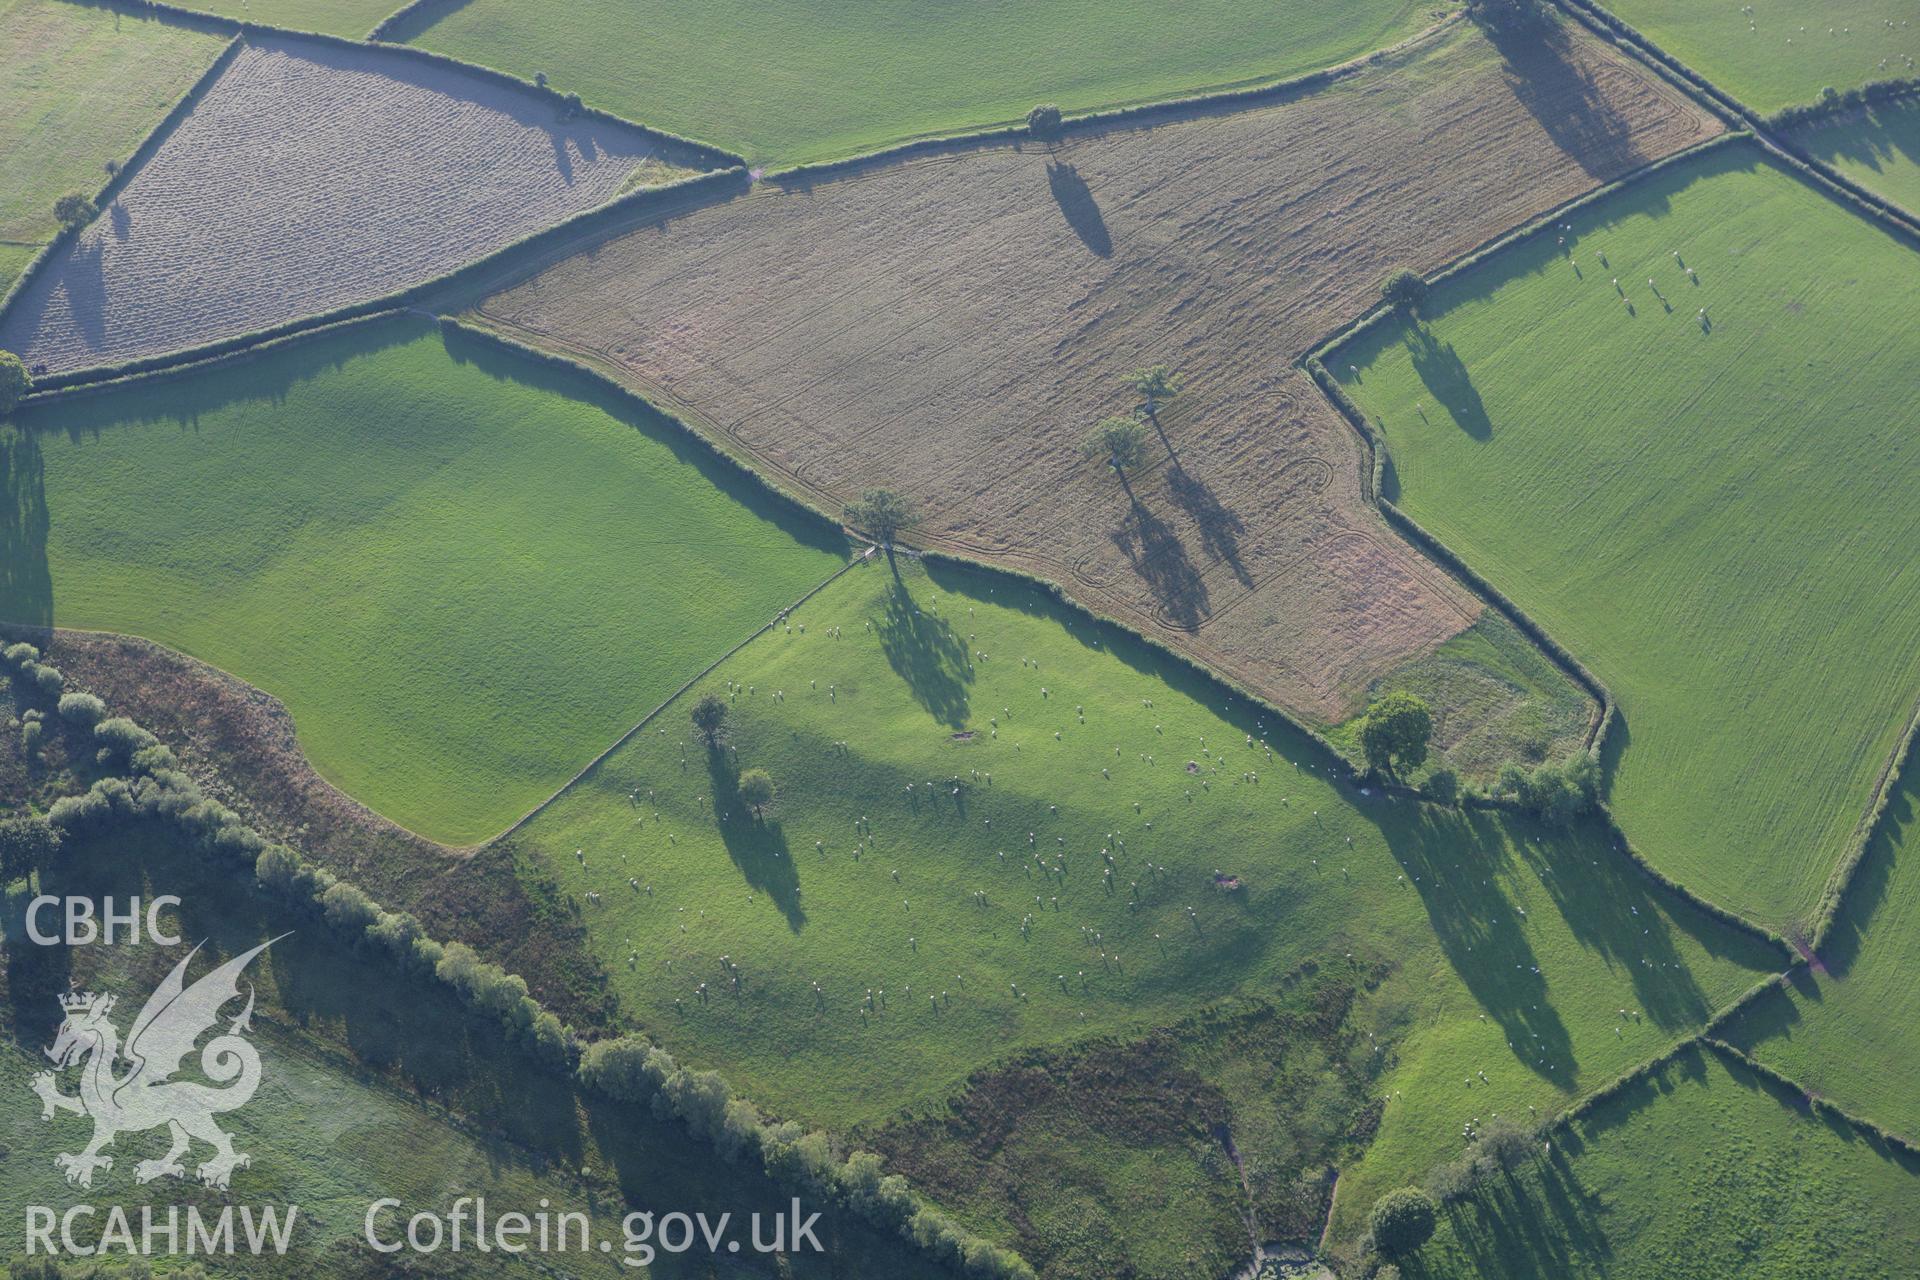 RCAHMW colour oblique aerial photograph showing indications of earthworks, Pant y Cored. Taken on 08 August 2007 by Toby Driver